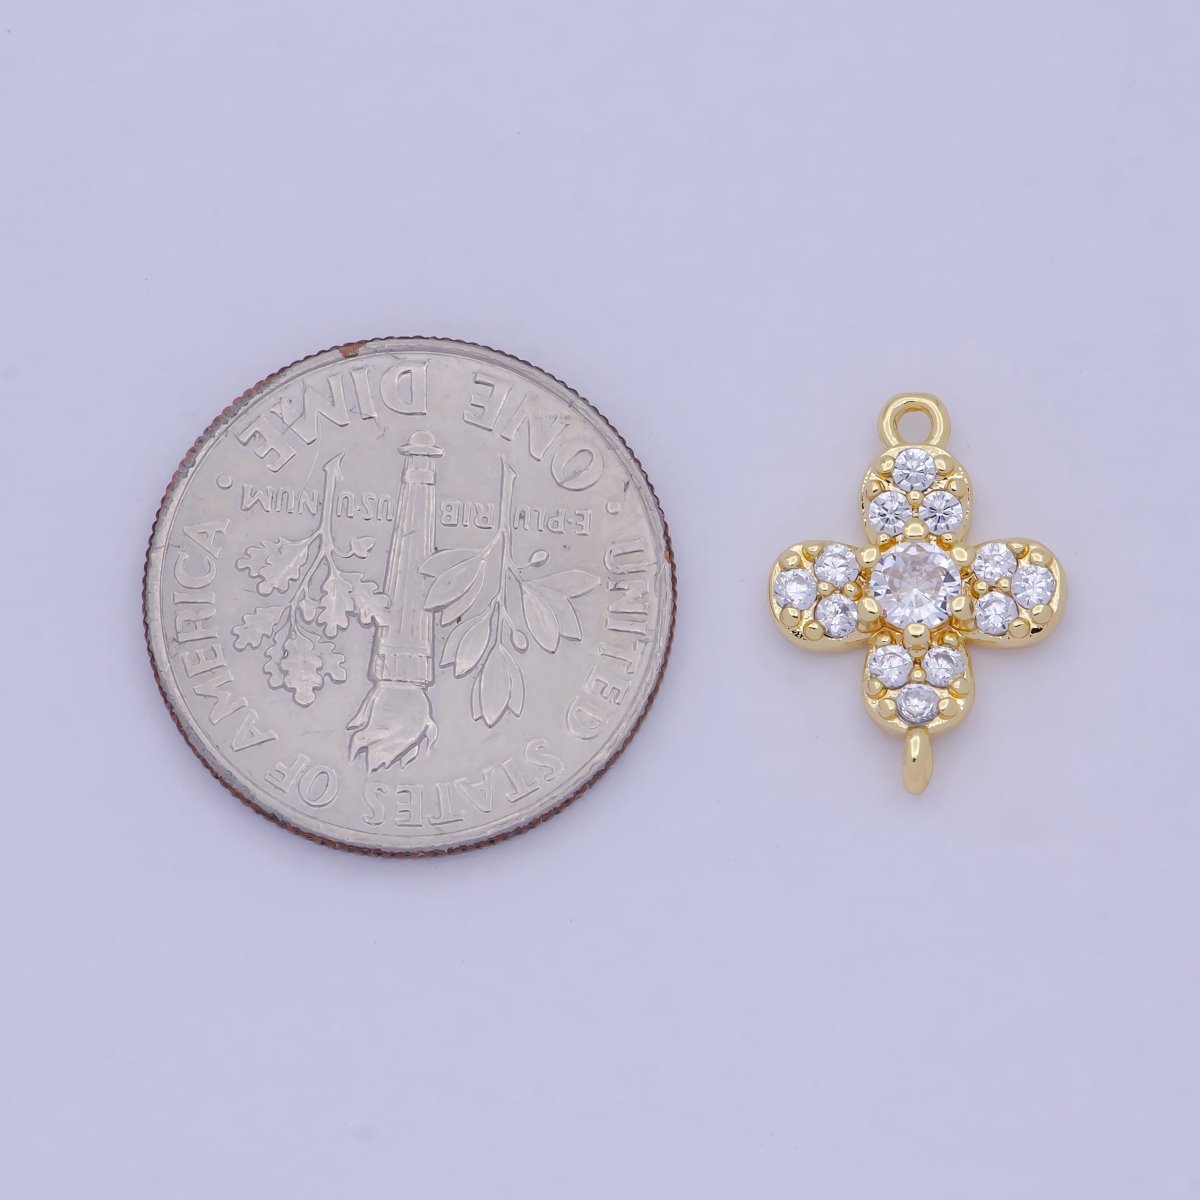 Mini Cross Charm Connector for Earring Bracelet Necklace Link Connector F-797 - DLUXCA